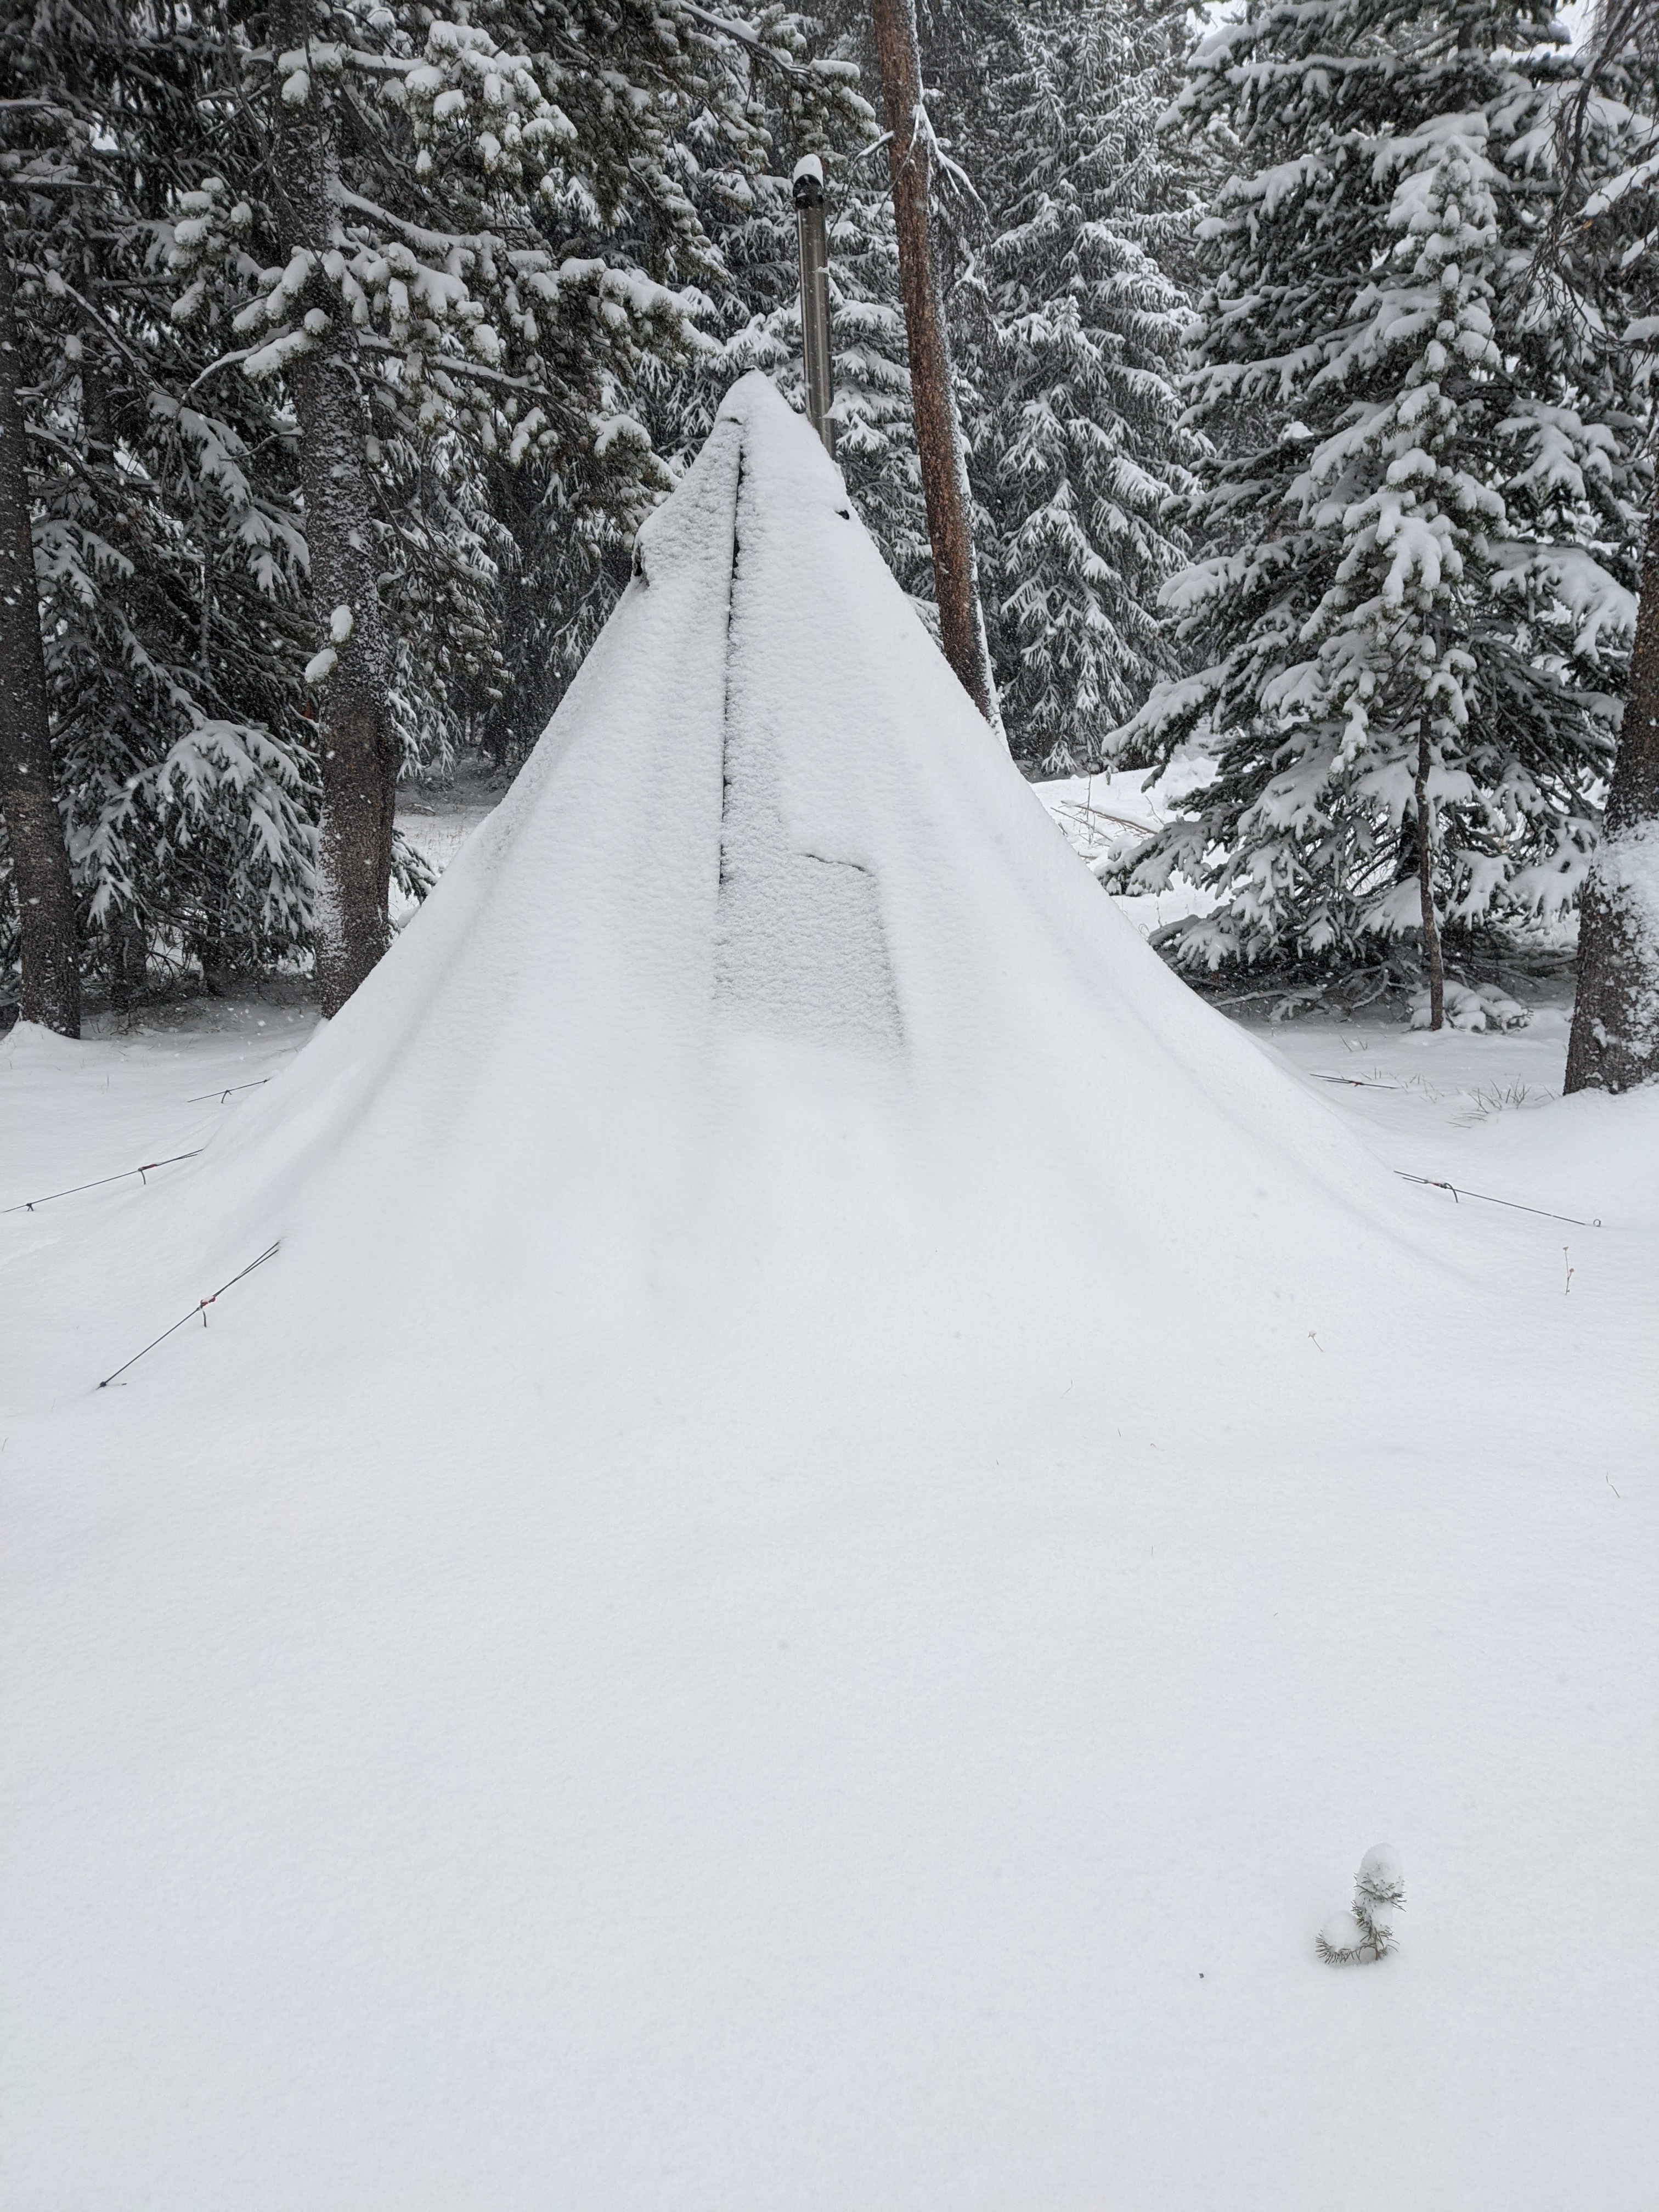 Our SeekOutside Tipi after a healthy amount of snow came down during elk season.